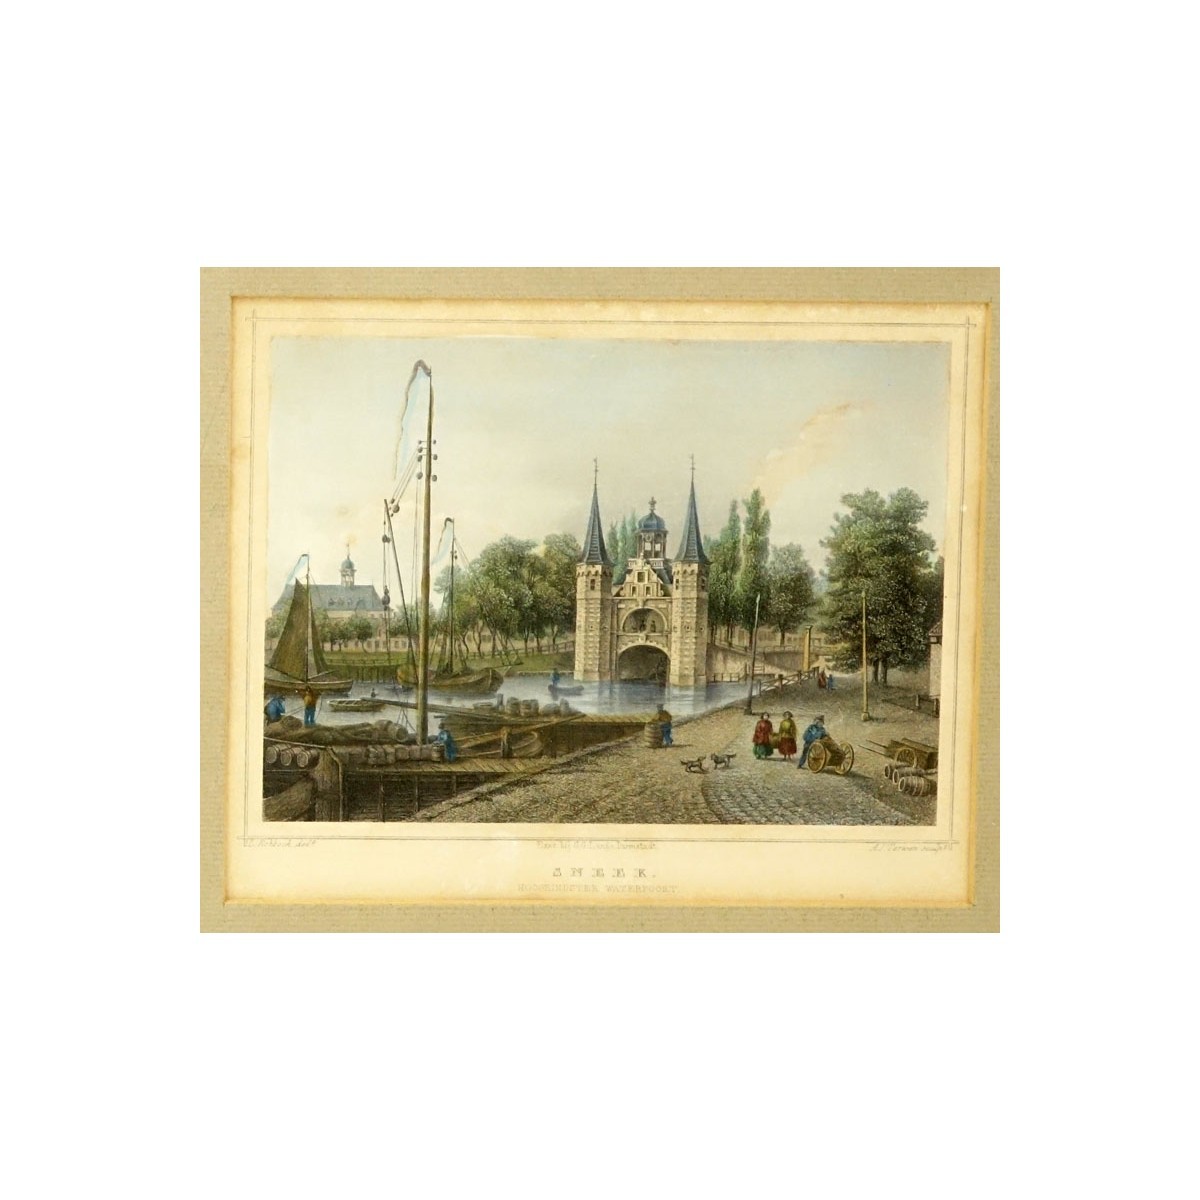 Two (2) Antique Engravings View of Nootdorp